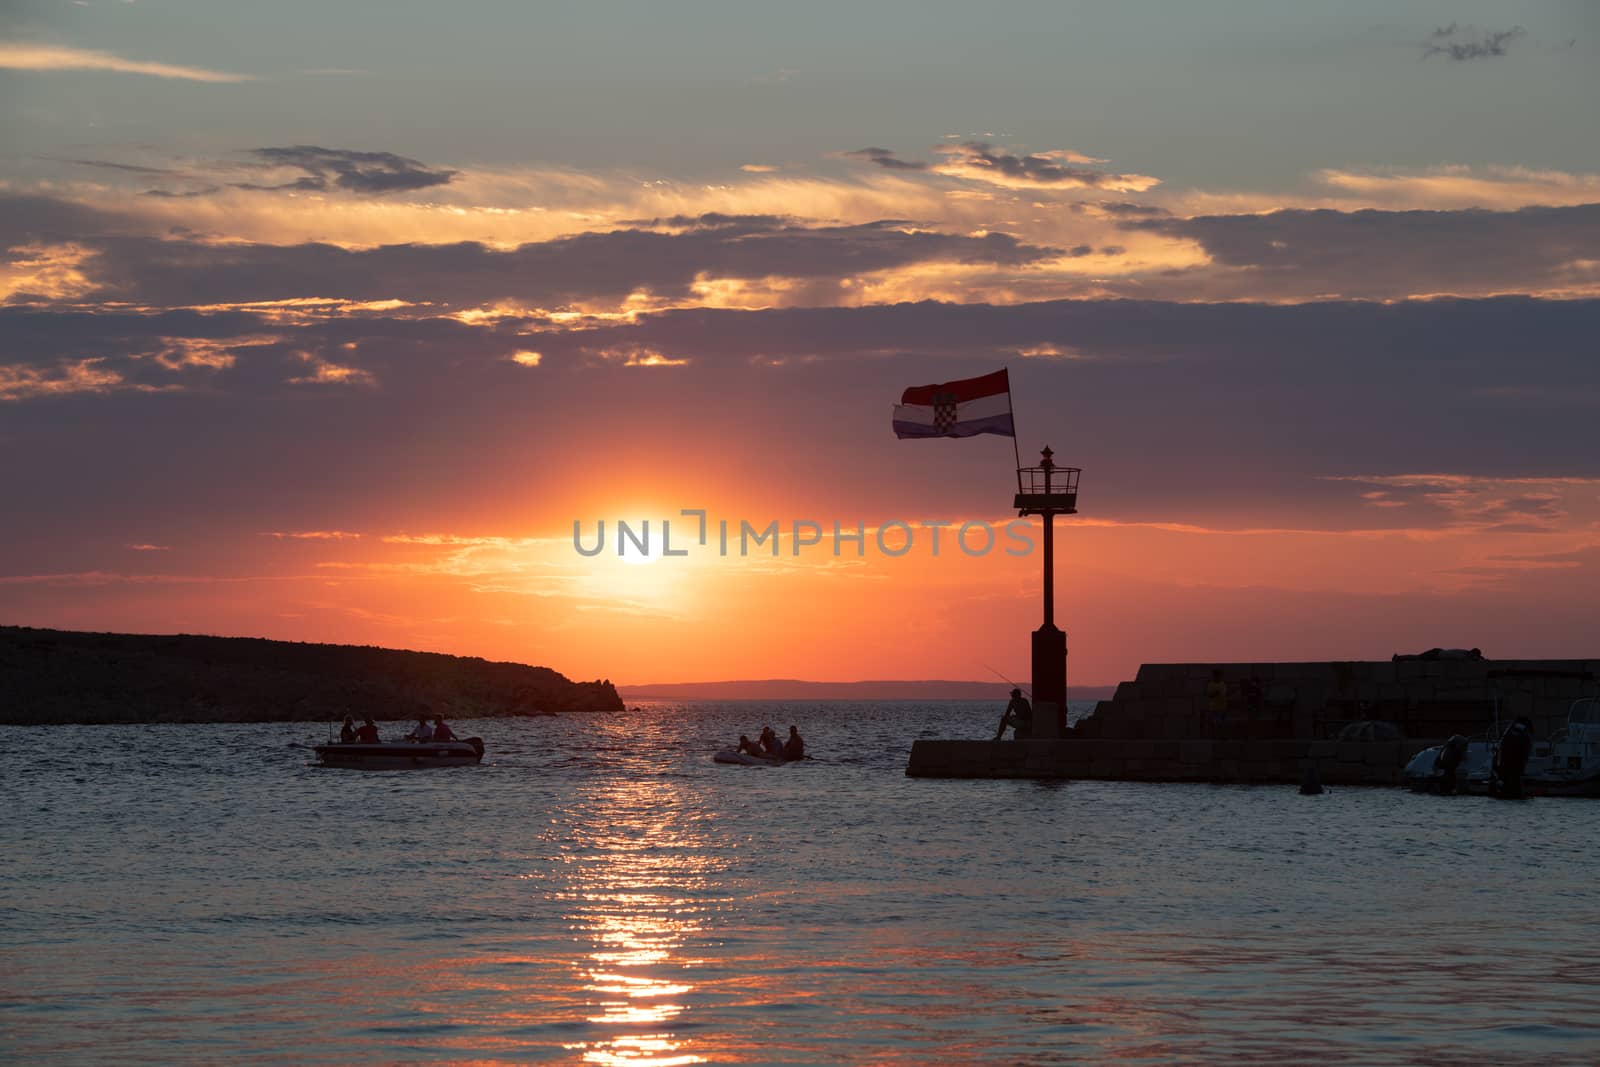 Croatian flag flying in wind at sunset in harbor, all people silhuetted and unrecognizable, small boats in front near lighthouse